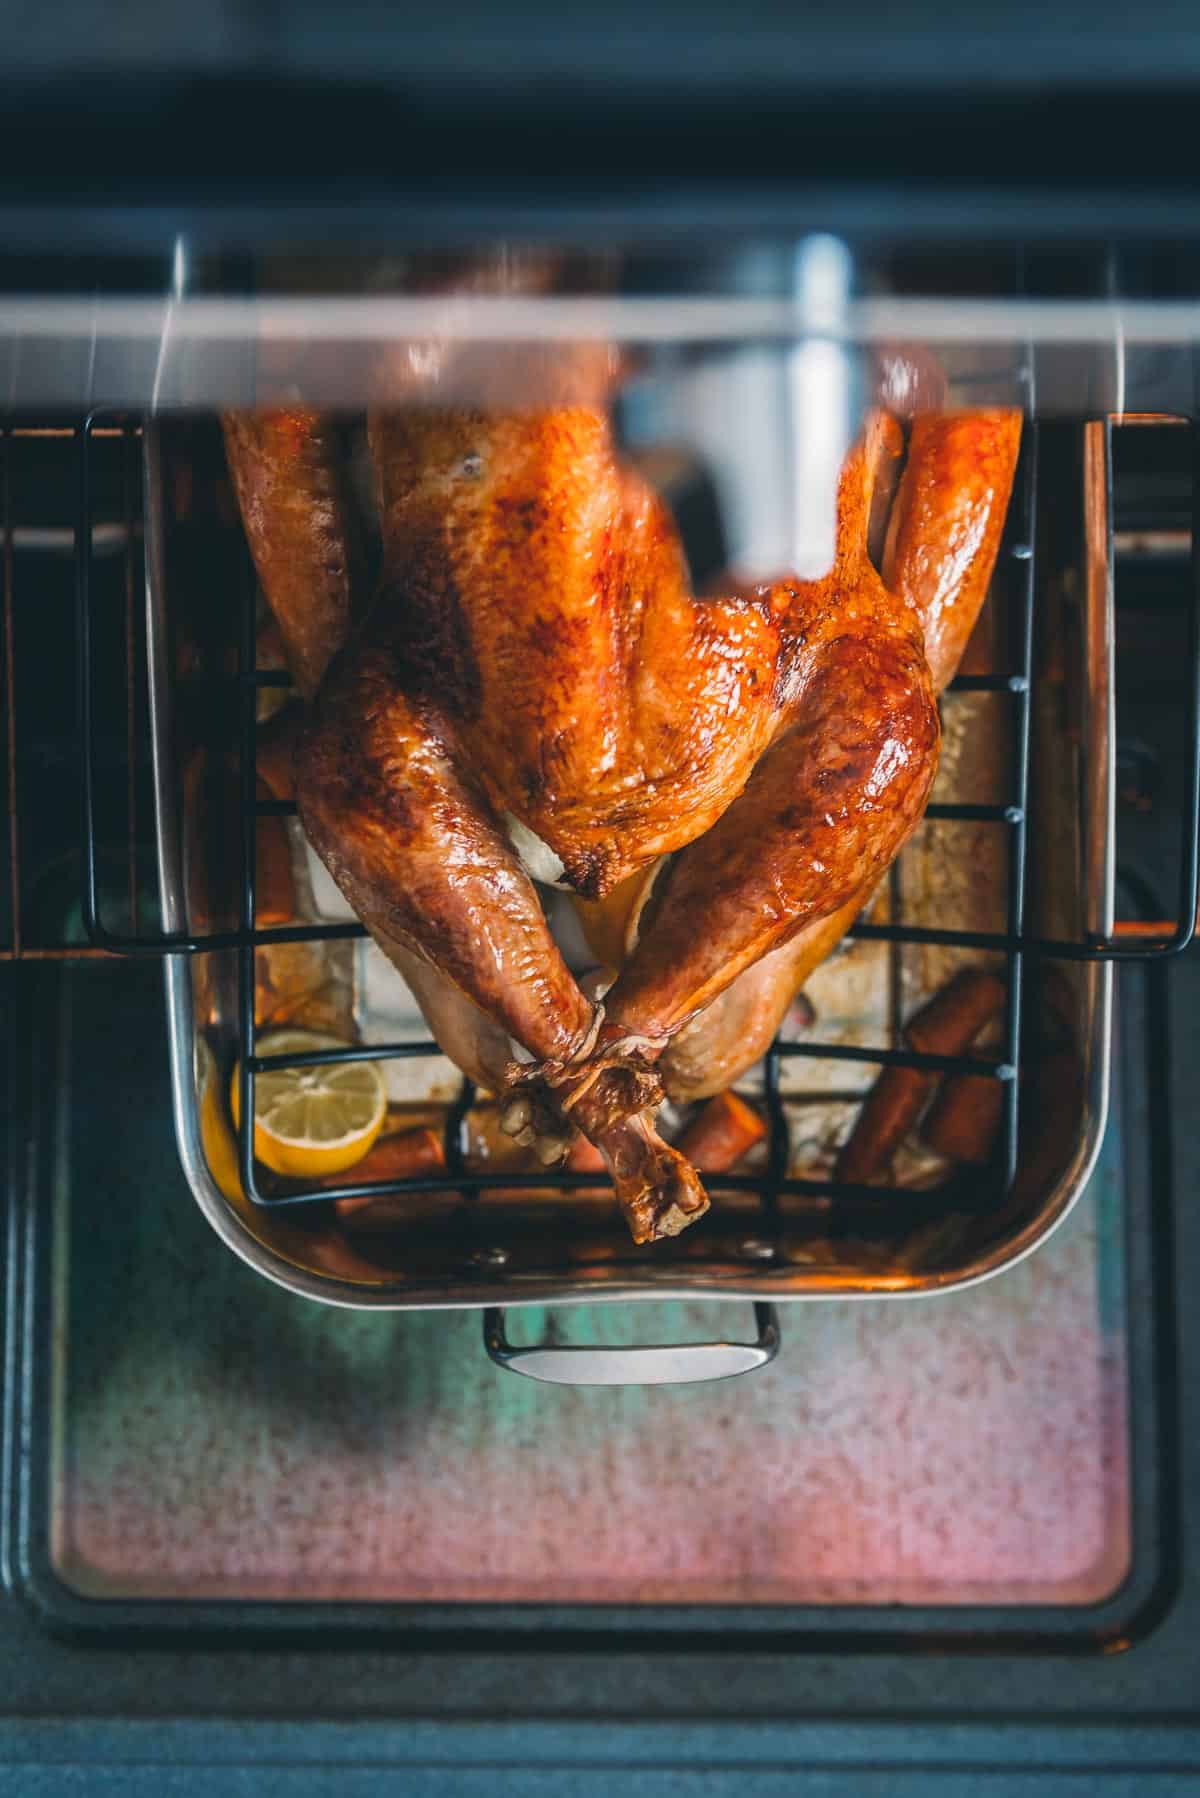 How to cook Thanksgiving turkey in an RV oven